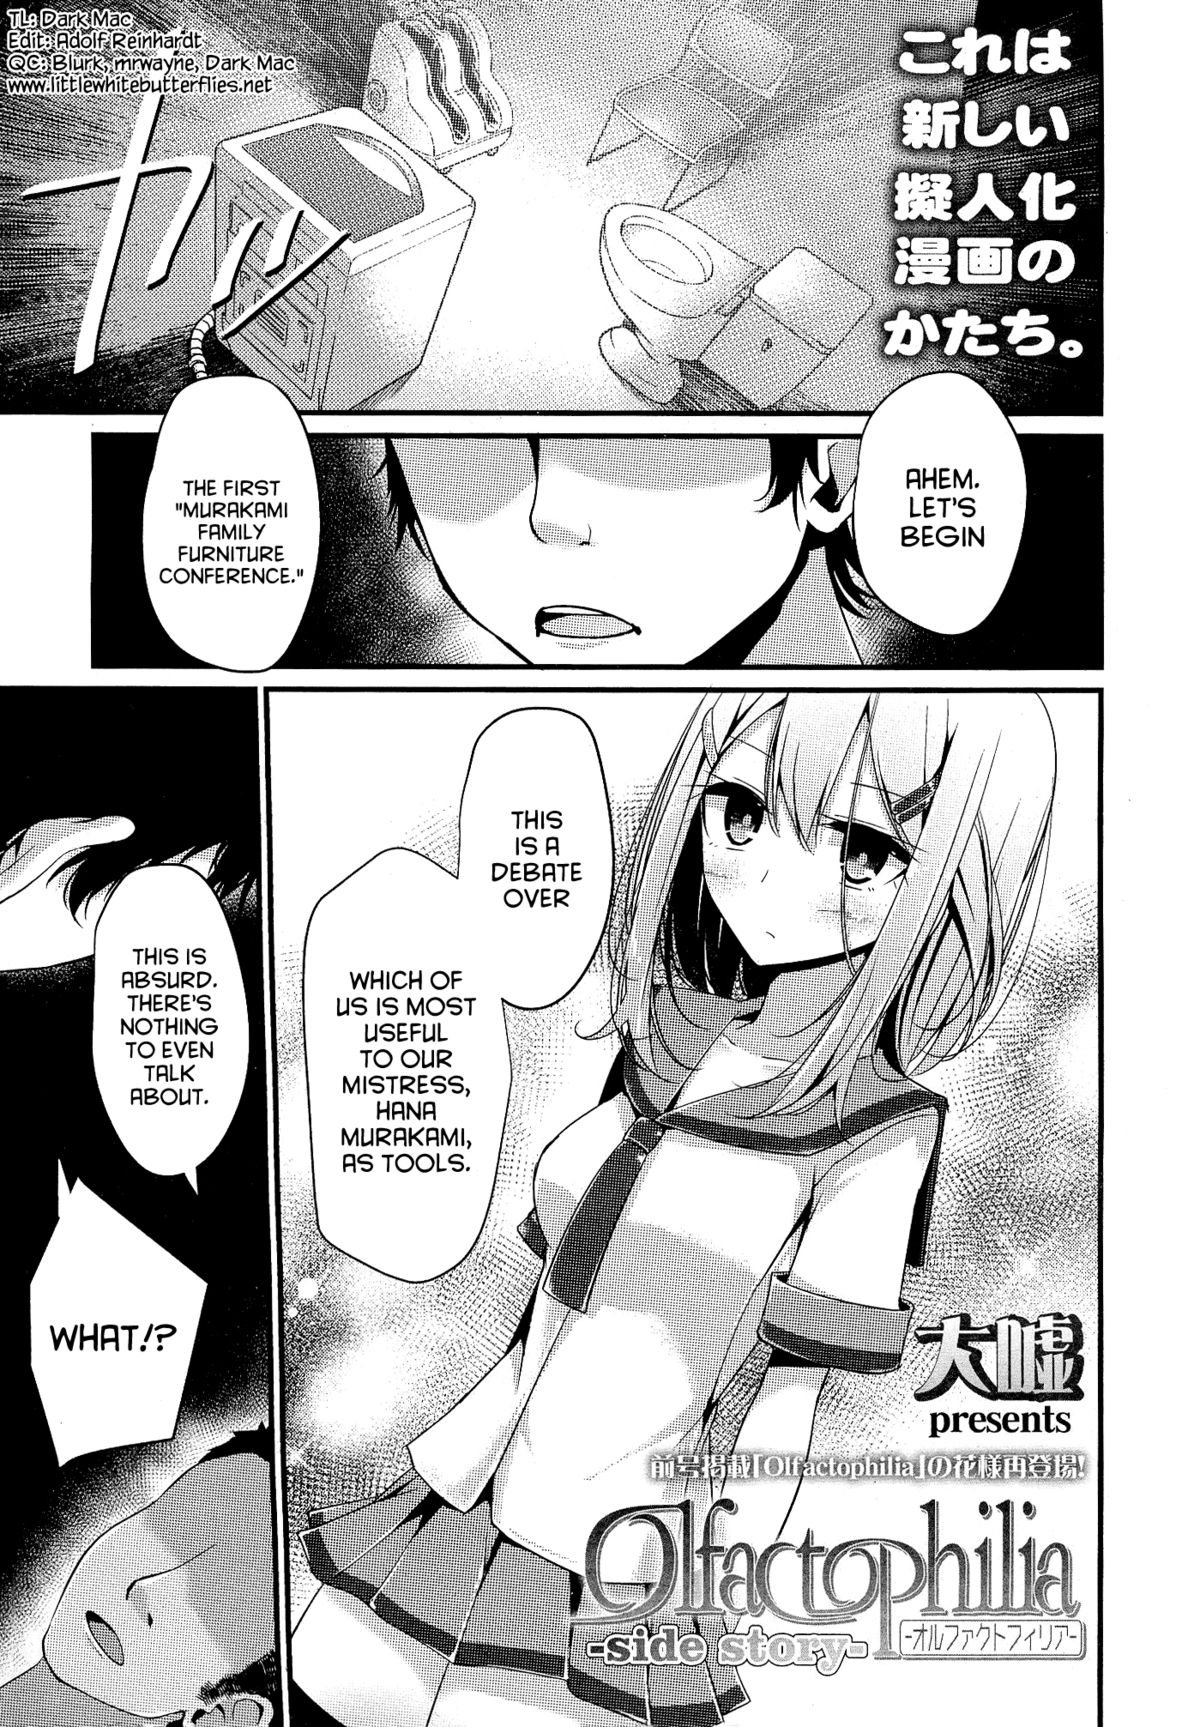 [Oouso] Olfactophilia -Side Story- (Girls forM Vol. 07) [English] =LWB= page 1 full